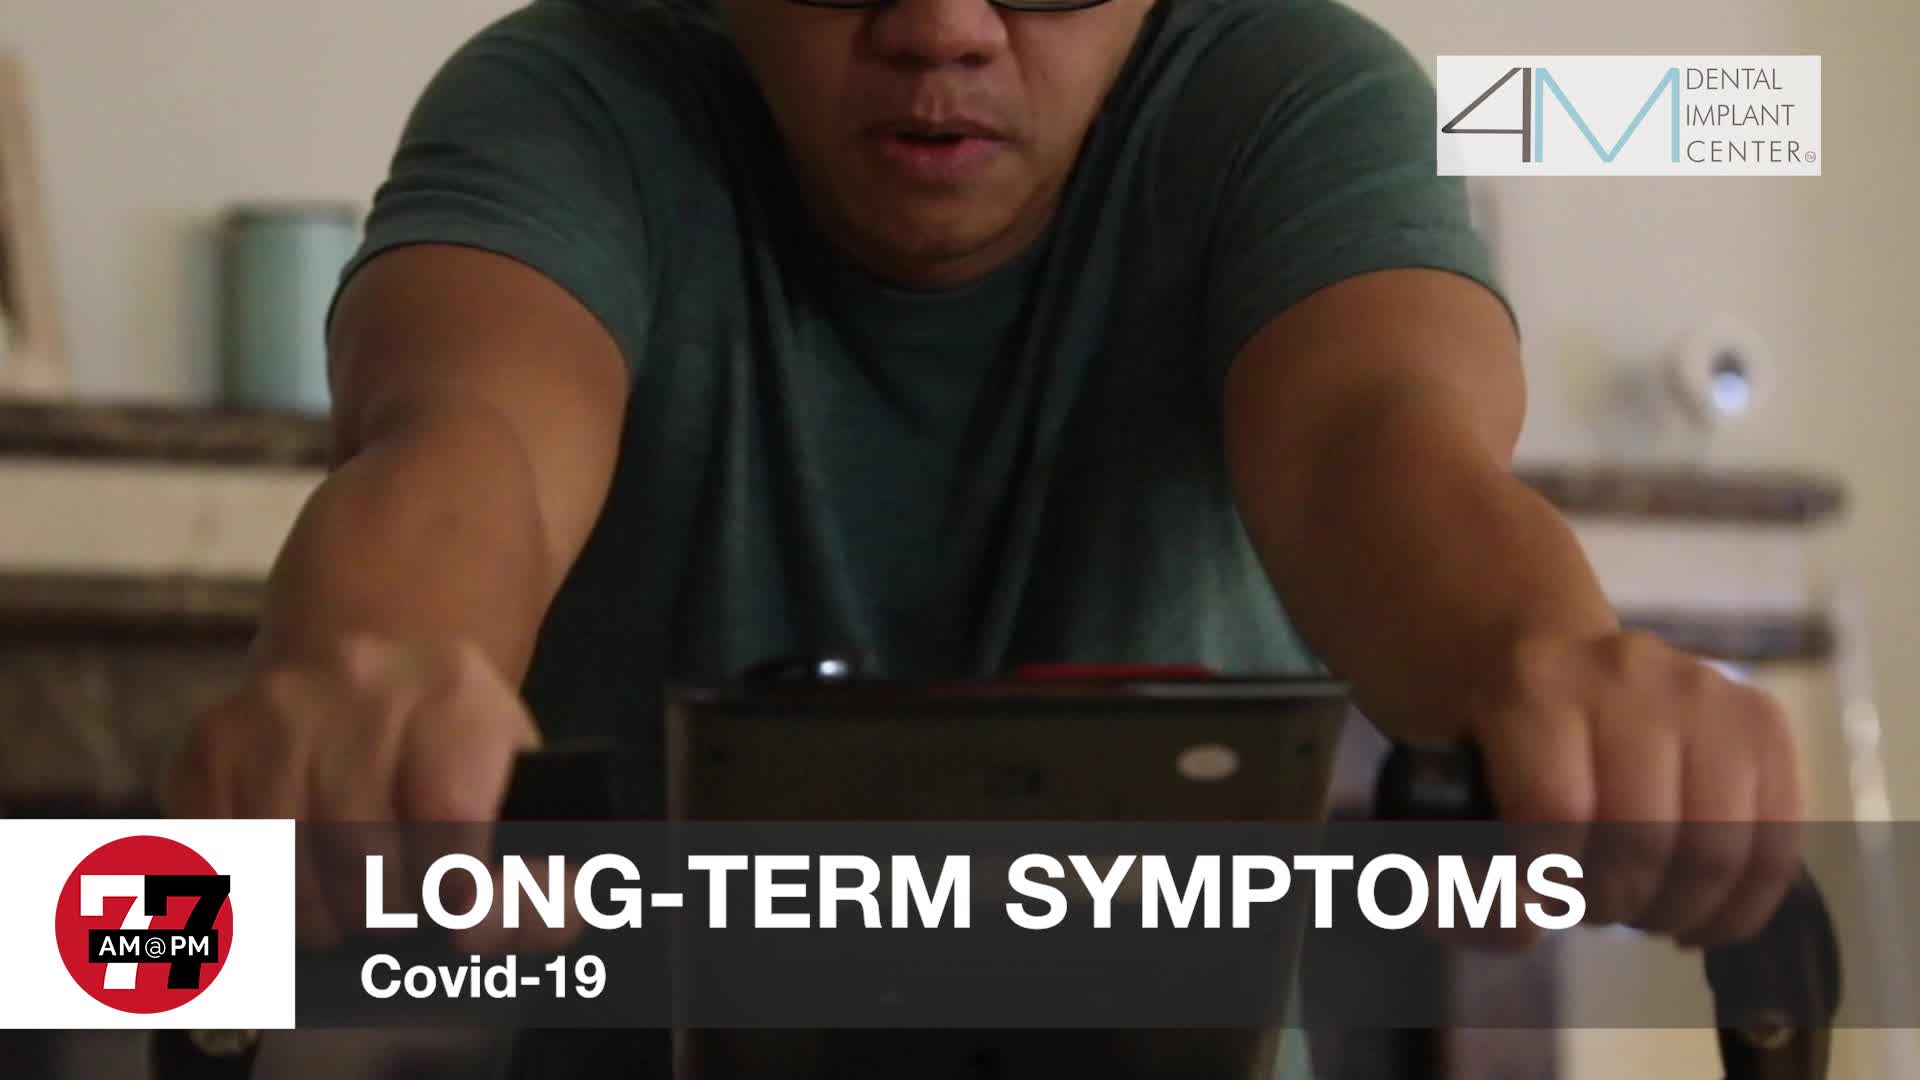 Living with Long-Term Covid Symptoms